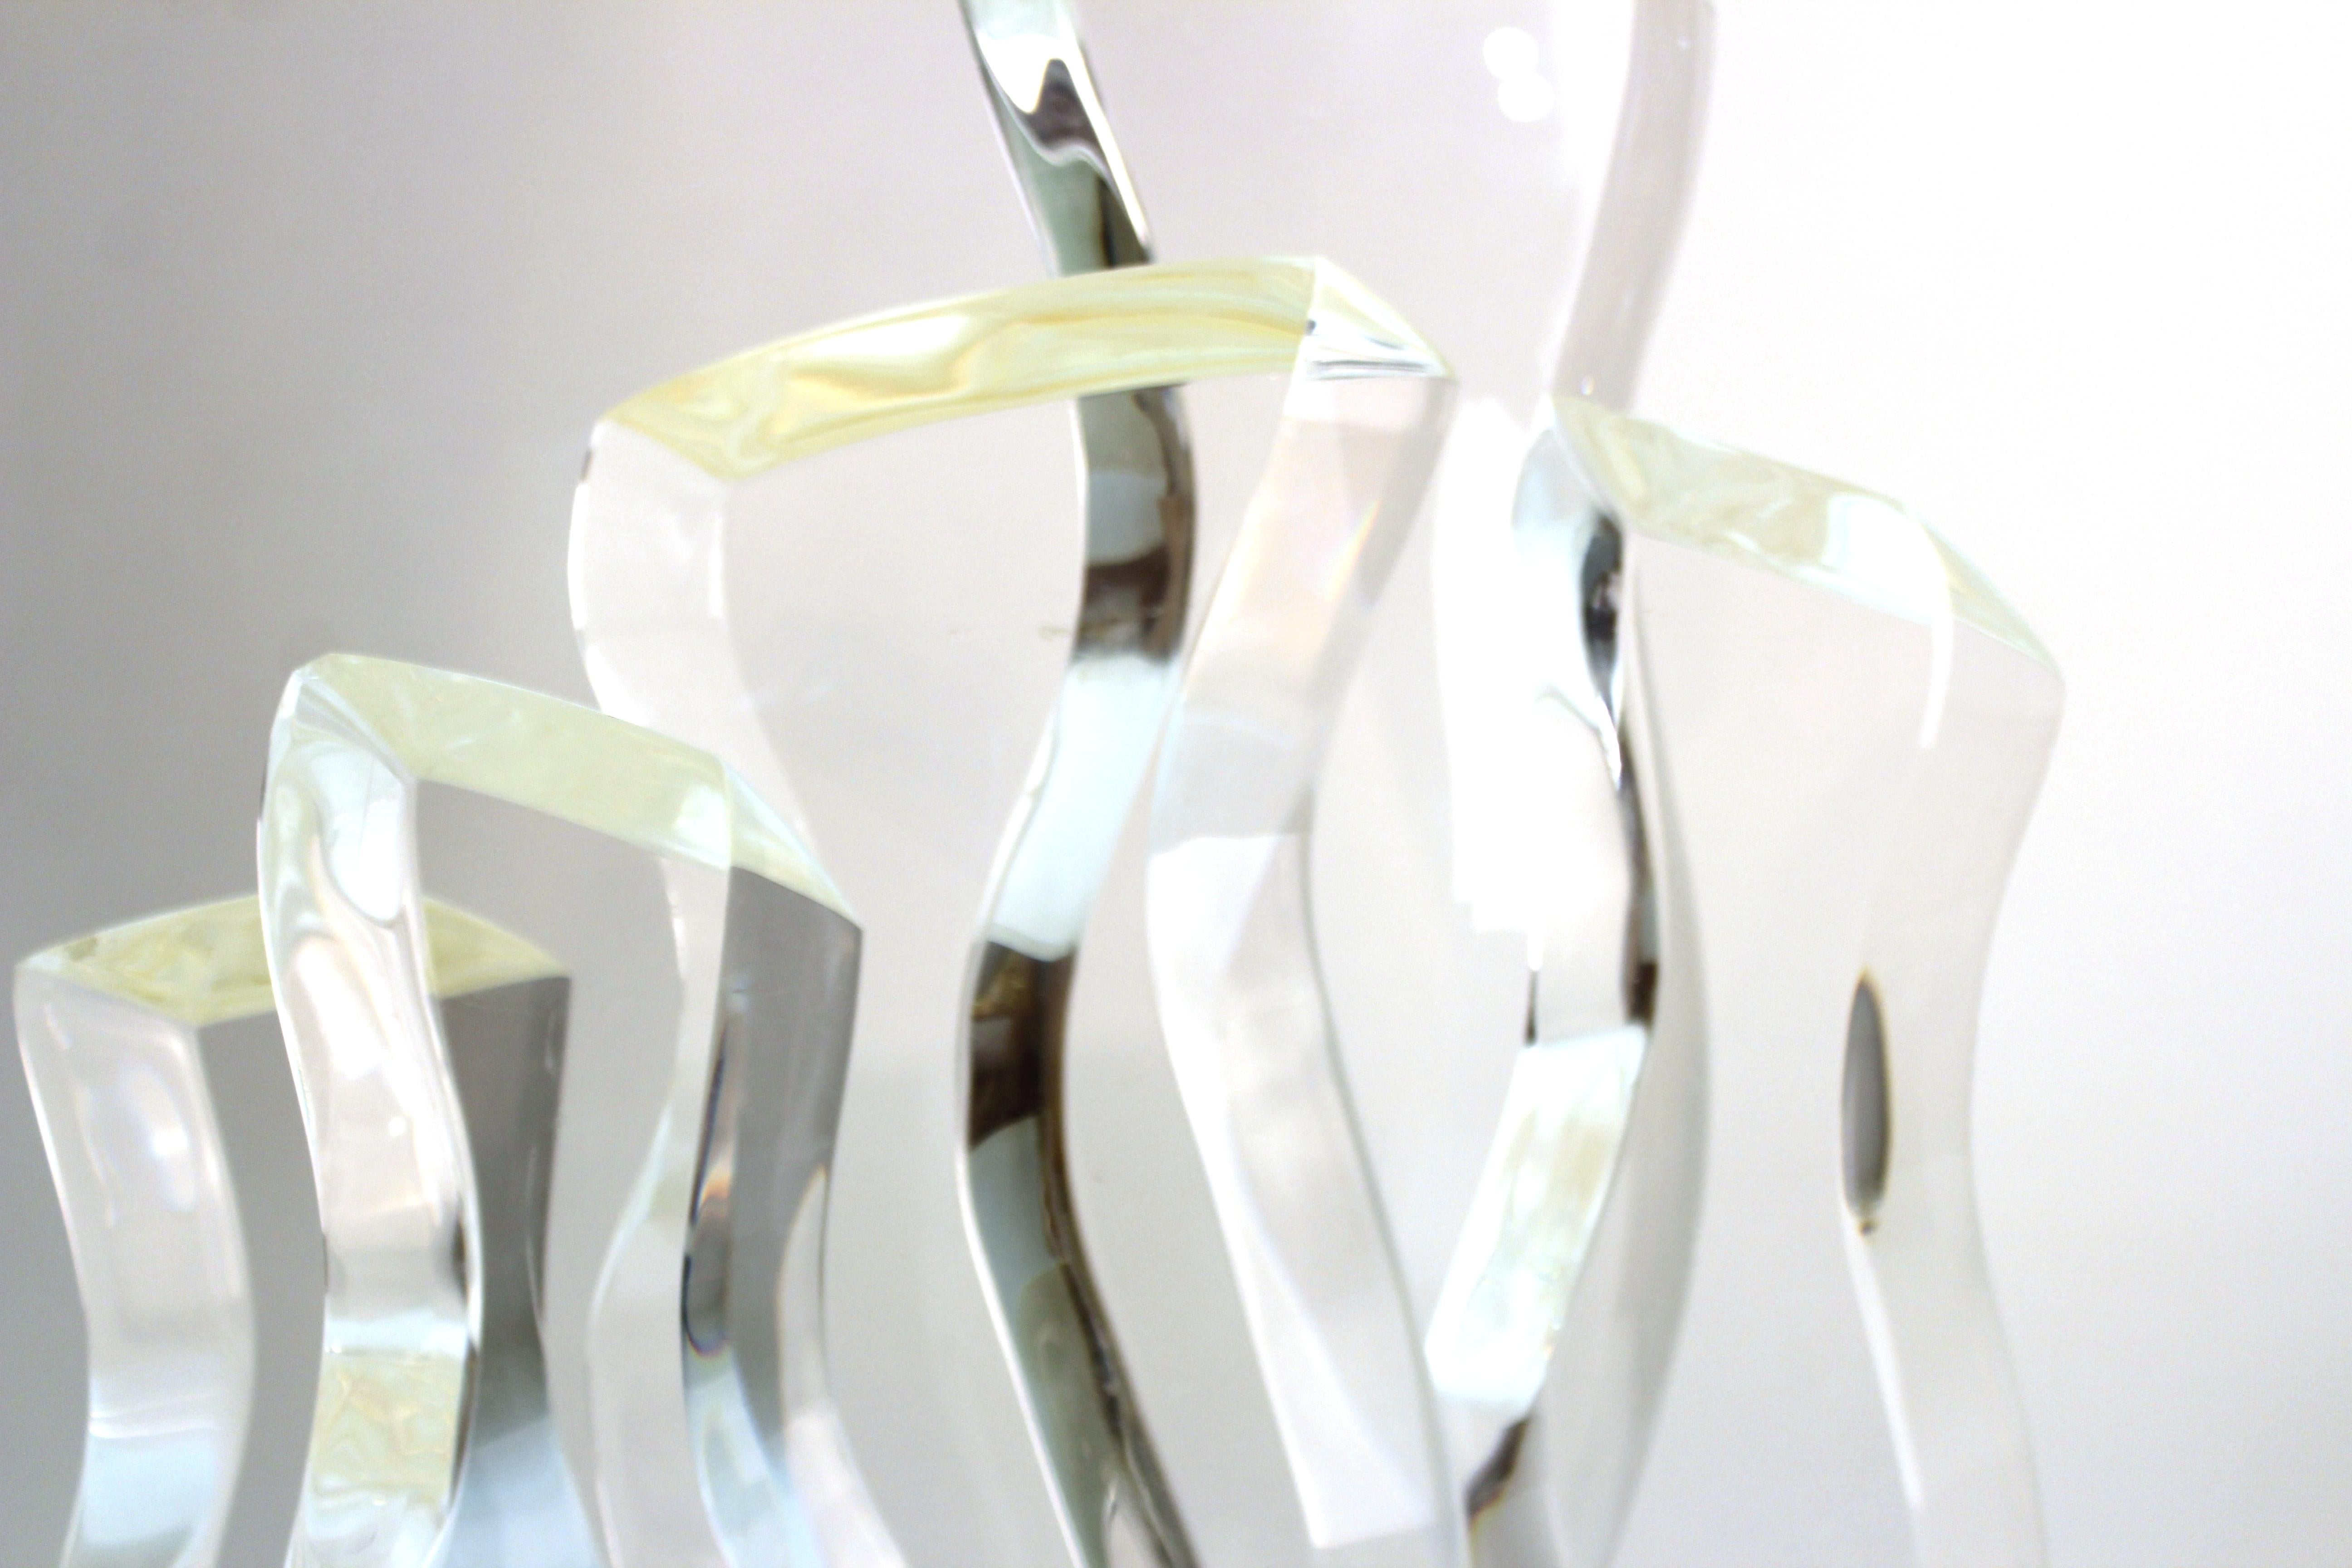 Mid-Century Modern abstract Lucite sculpture designed by Hivo Van Teal in the shape of wave elements rising from a base. The piece is signed by the maker on one of the corners of the base and is in great vintage condition with age-appropriate wear.